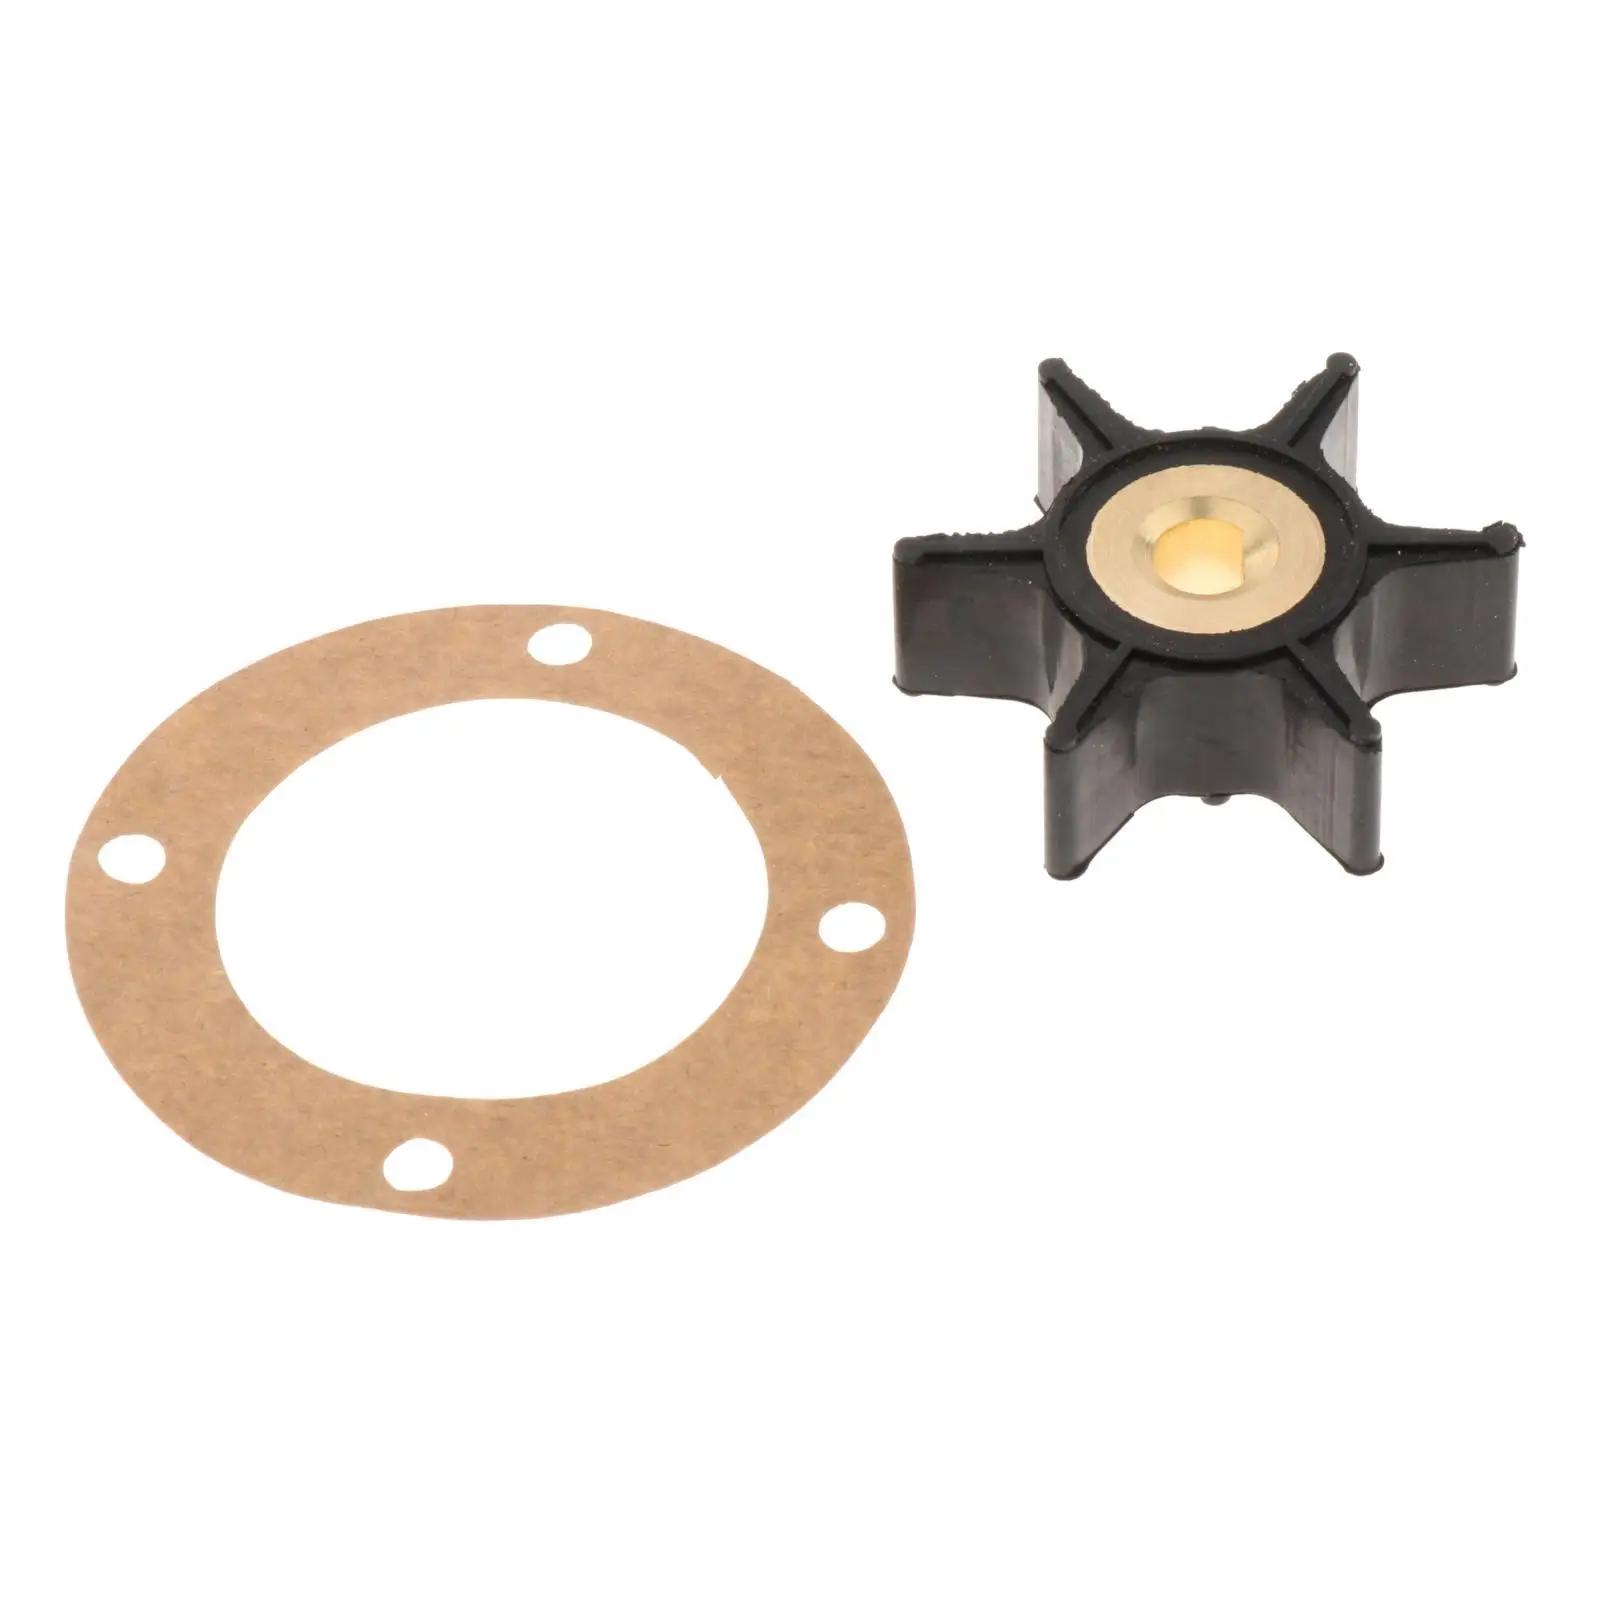 2 Pieces Impeller and 4-Hole Gasket Kit Accessories  Parts Impeller Gasket Kit  131-0386 170-3172 Mcck 4.0 kW ,131-0257